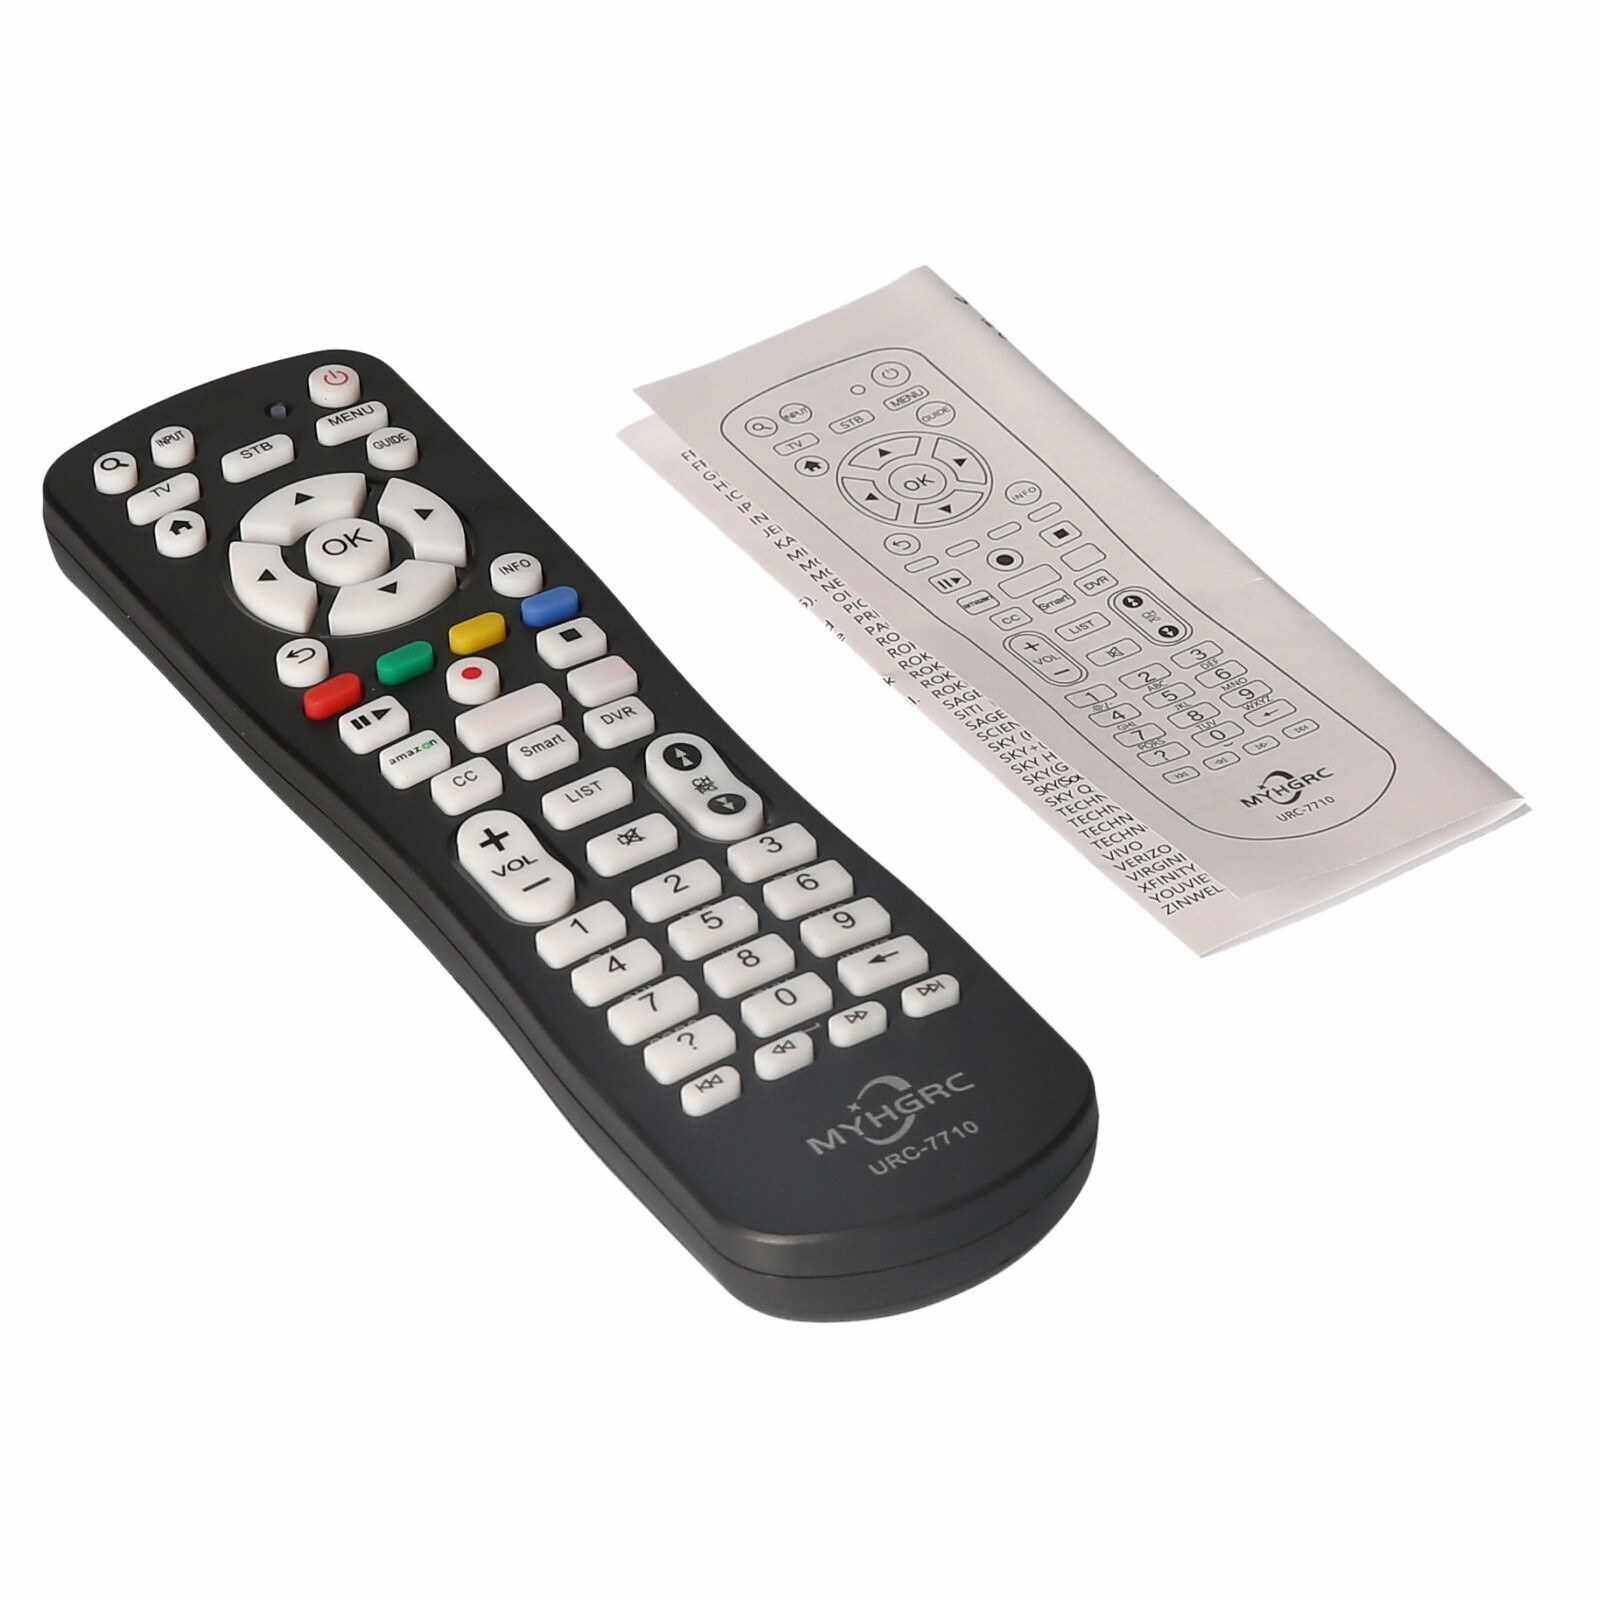 URC-7710 Universal Smart TV Remote Control Replacement for Samsung LG Sony Smart TVs TV/STB Smart Digital TV Box Television (Black)